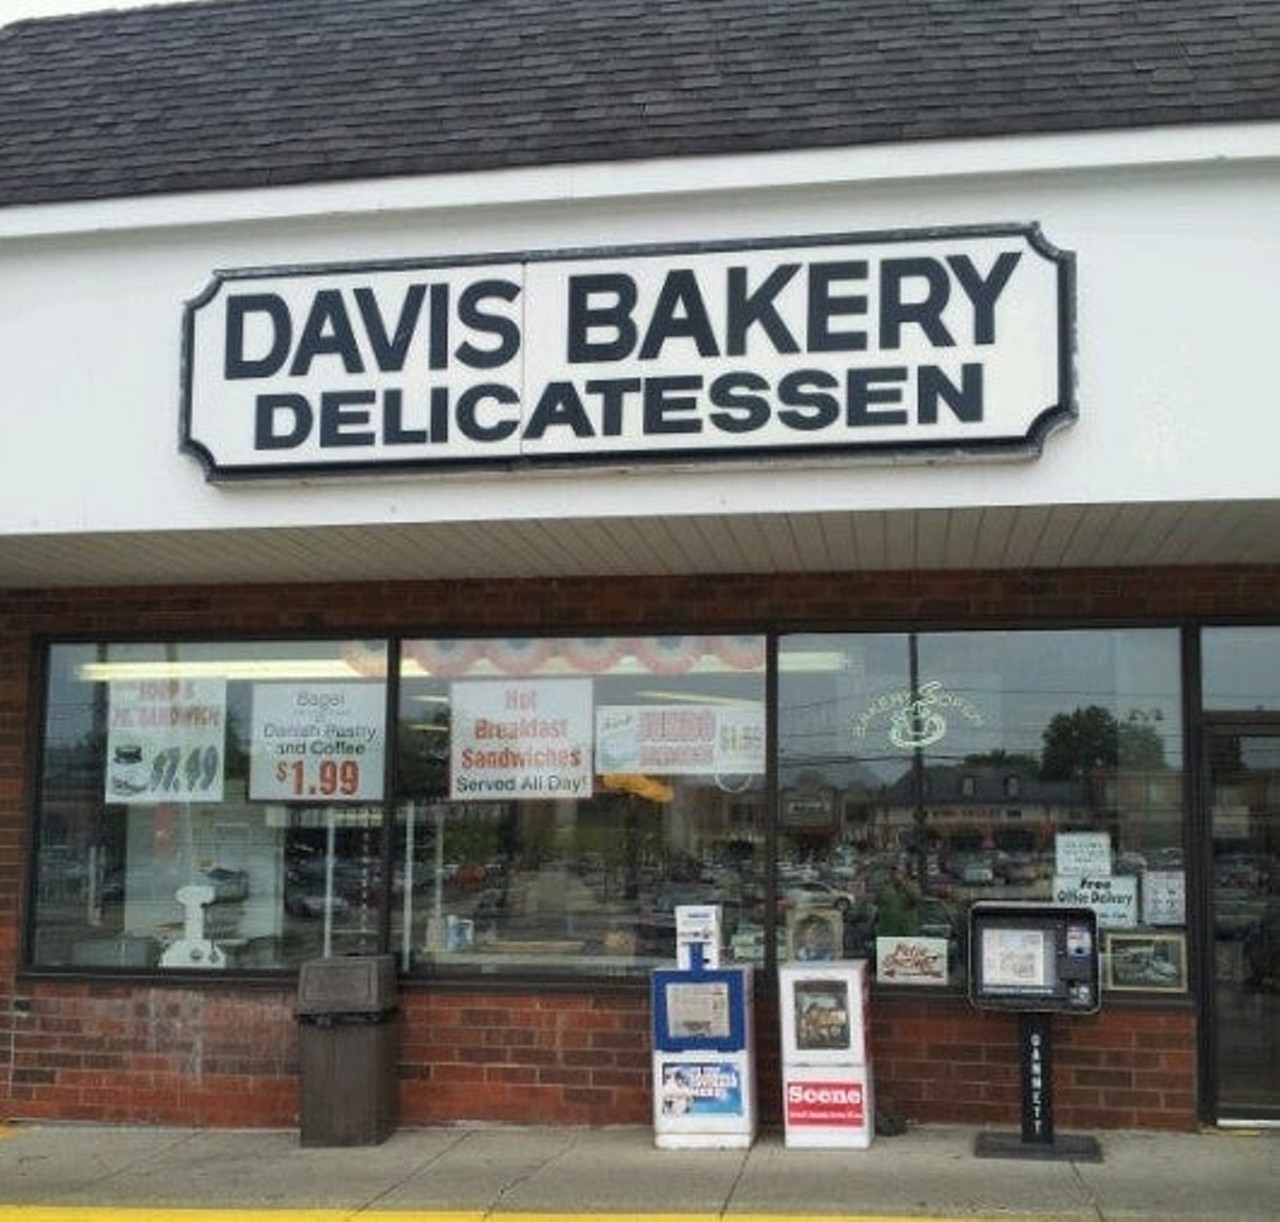  Davis Bakery and Deli
28700 Chagrin Blvd., Woodmere and 4572 Renaissance Pkwy., Cleveland 
&#147;I think I found my favorite deli. It is old school where the deli meats are on point and they are tasty. The staff is old school but give you that hurry up and order vibe but they love their good food and service is on point. My hot pastrami sandwich is the best I have had since moving to the Midwest,&#148; Frank S. on Yelp
Photo via Davis Bakery/Facebook